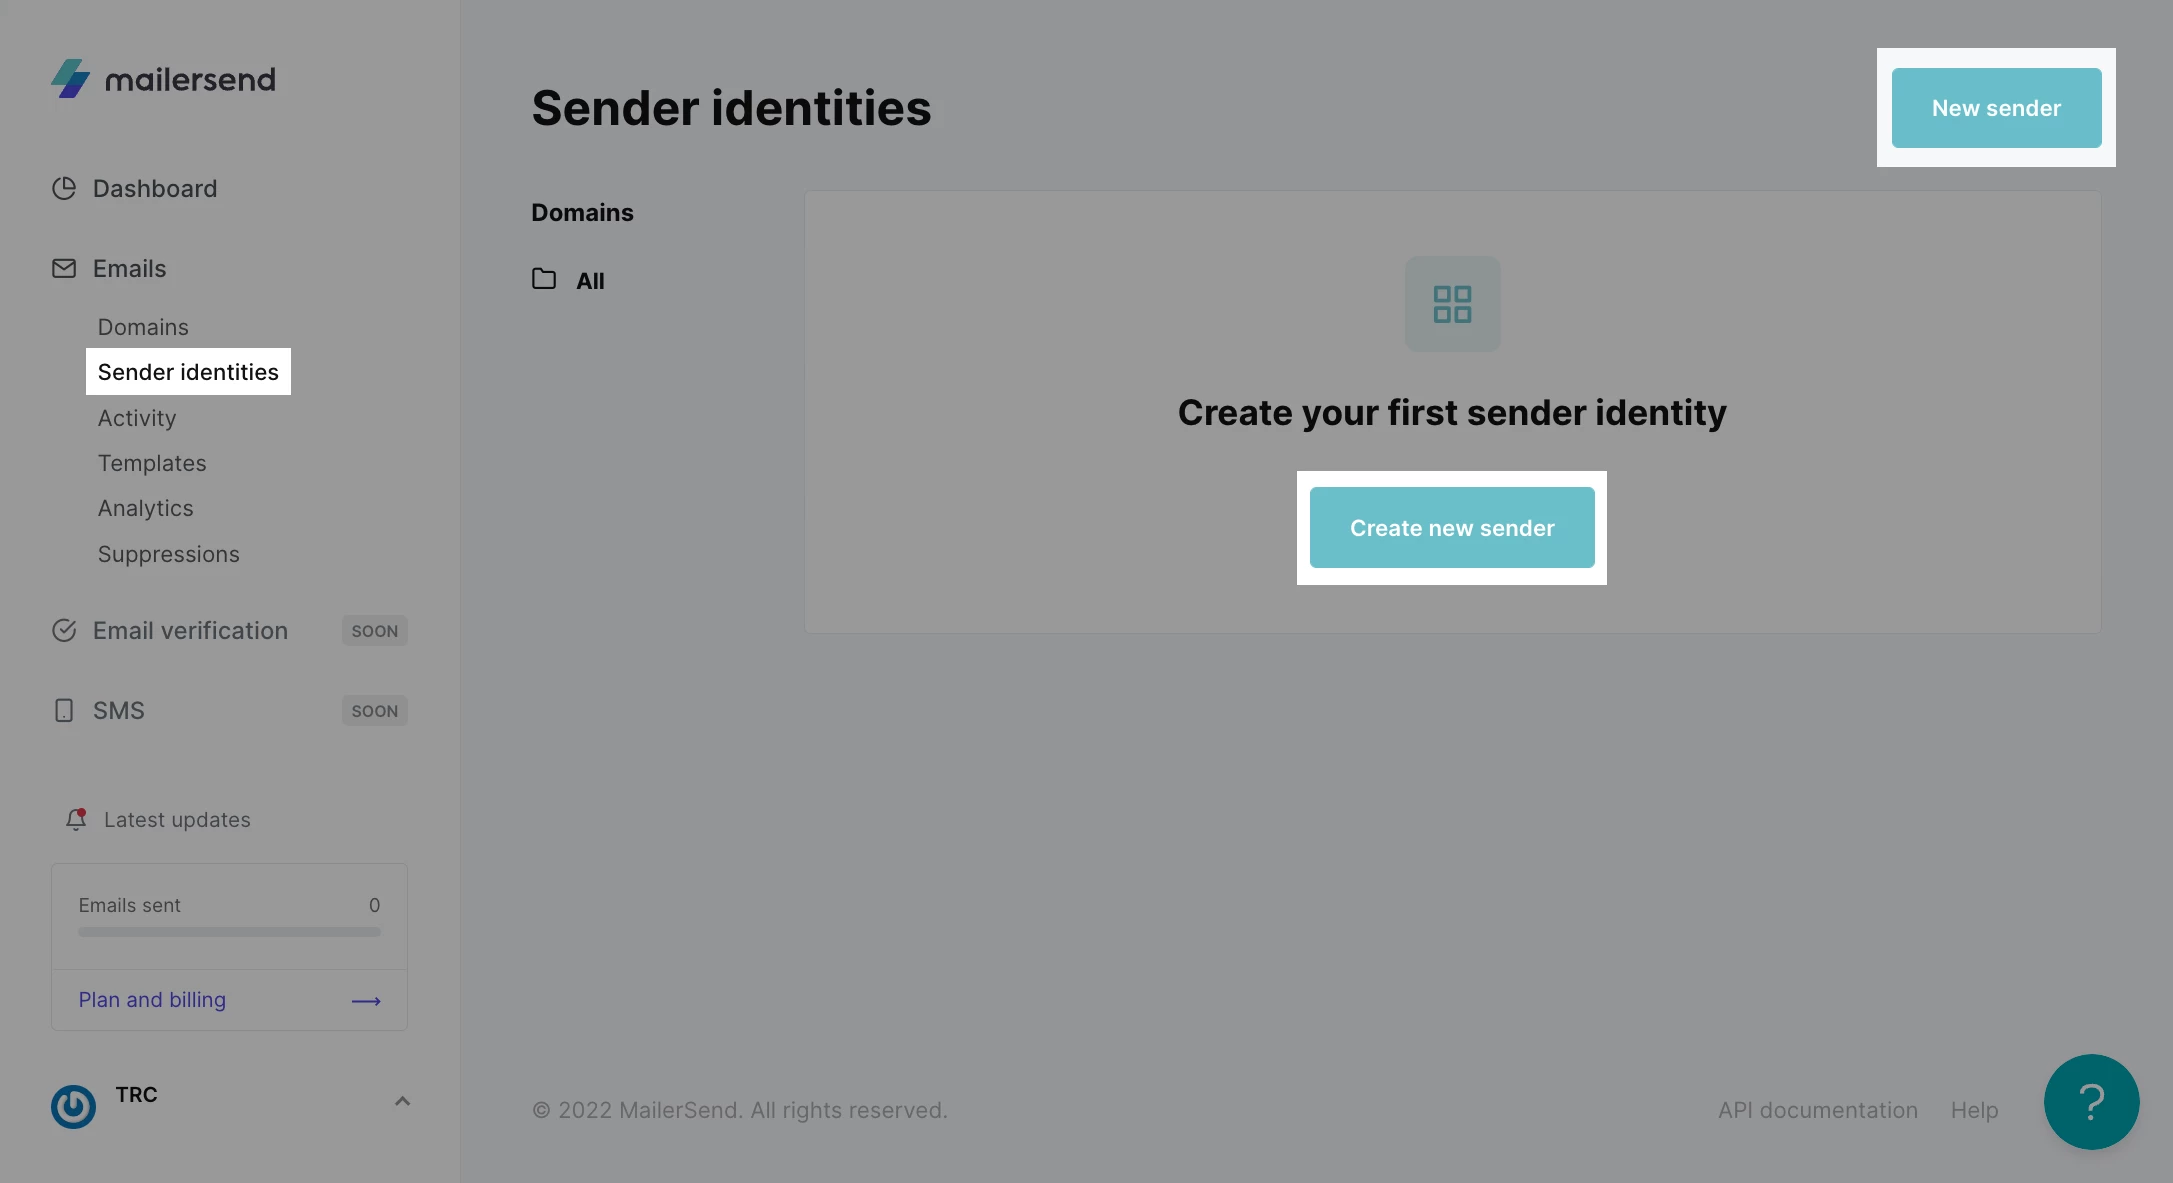 A view of the Sender identities page in MailerSend with the navigation highlighted.